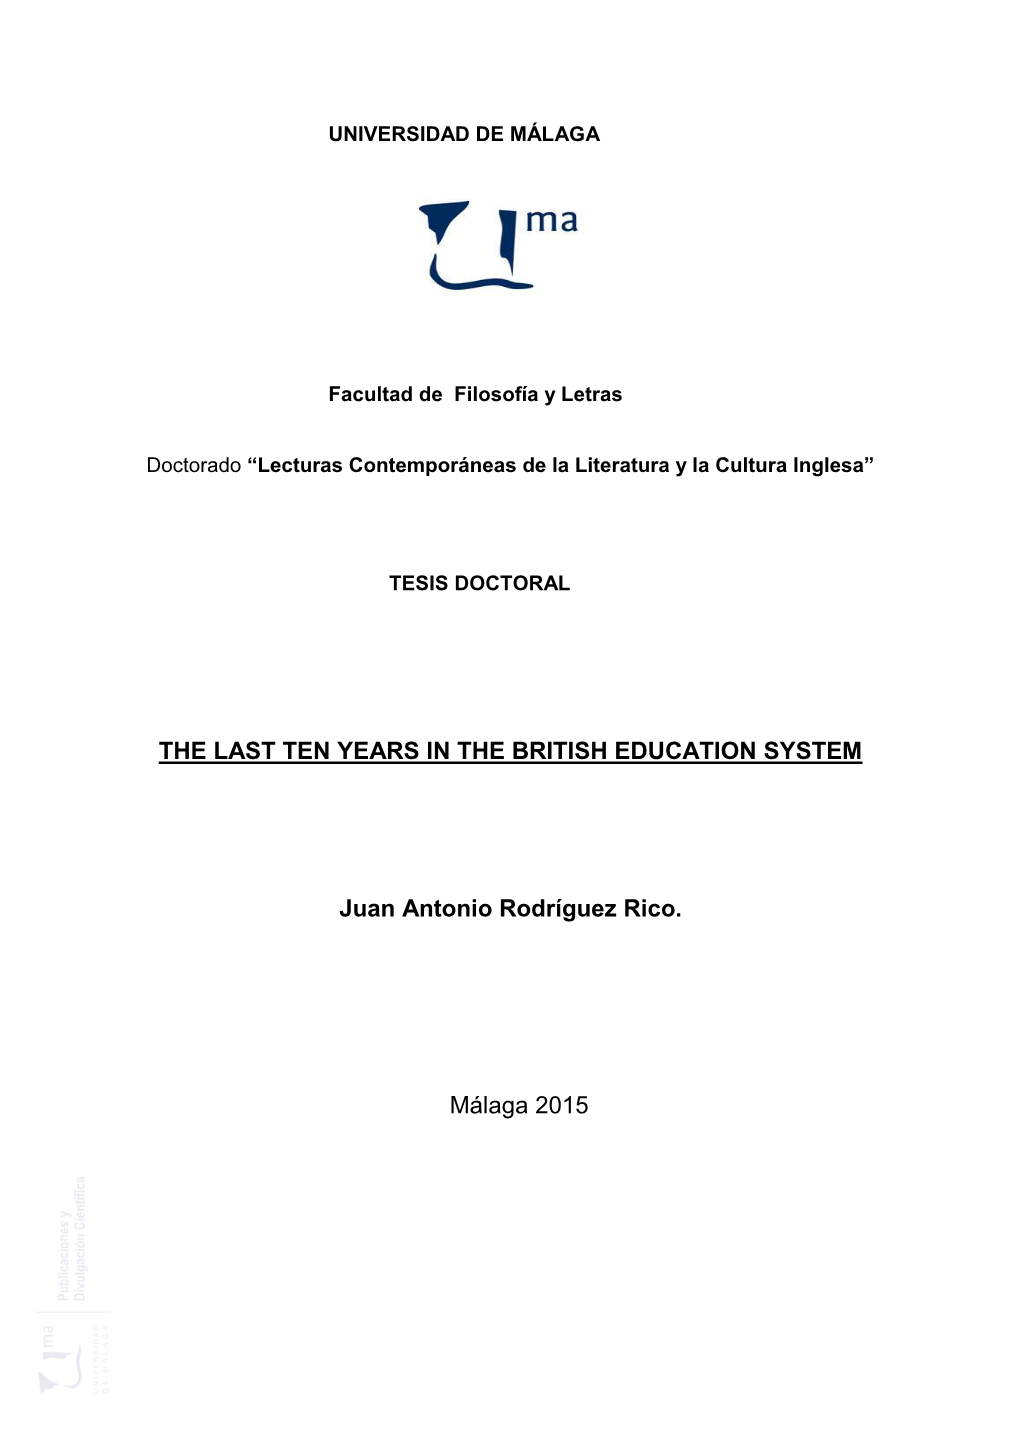 The Last Ten Years in the Bristish Education System